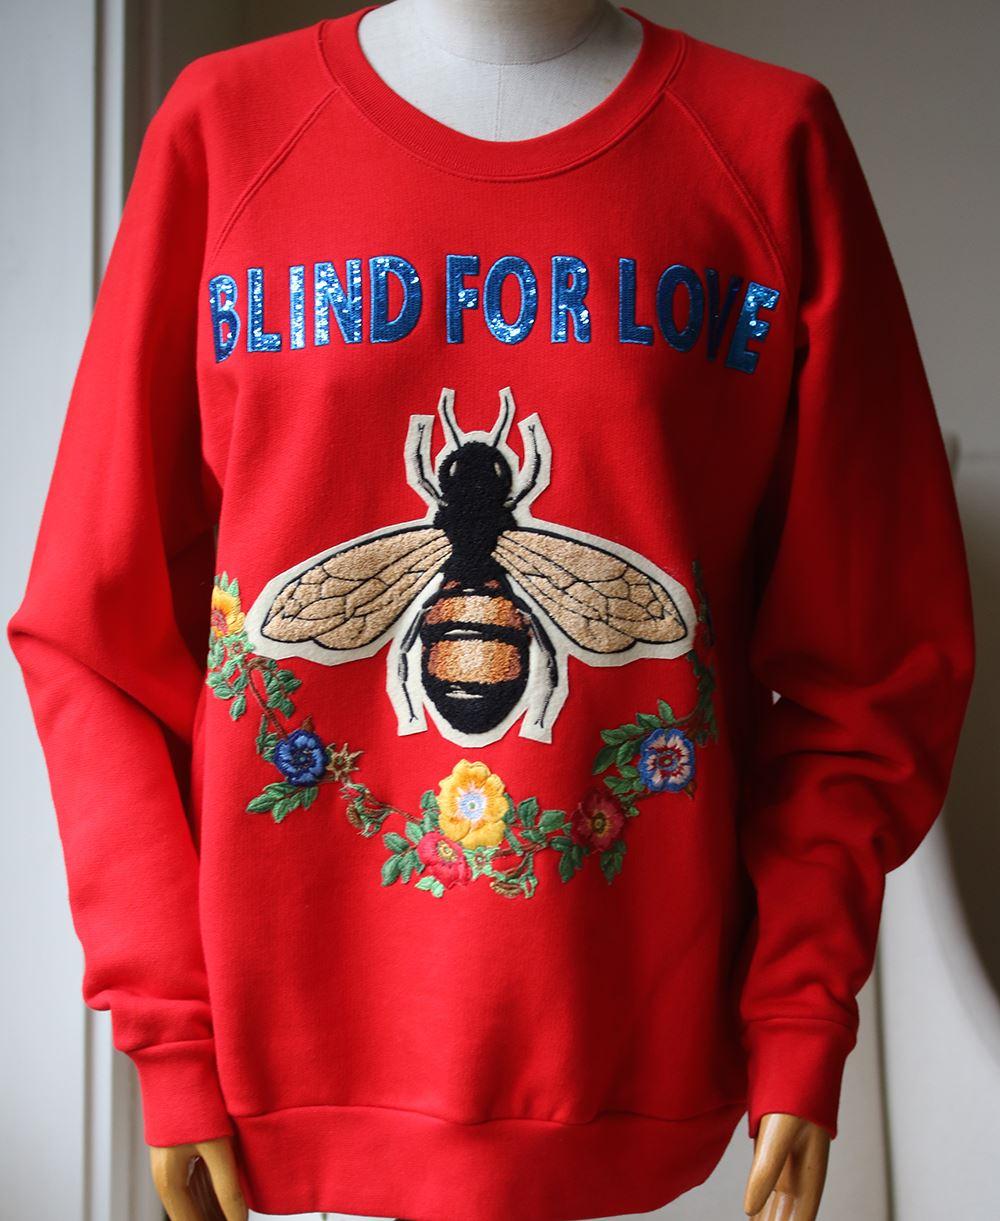 The sweatshirt, an essential cut carried season to season, features embroidered appliqués representing several symbolic Gucci motifs, including the bee surrounded by a garland of flowers. Blind for Love